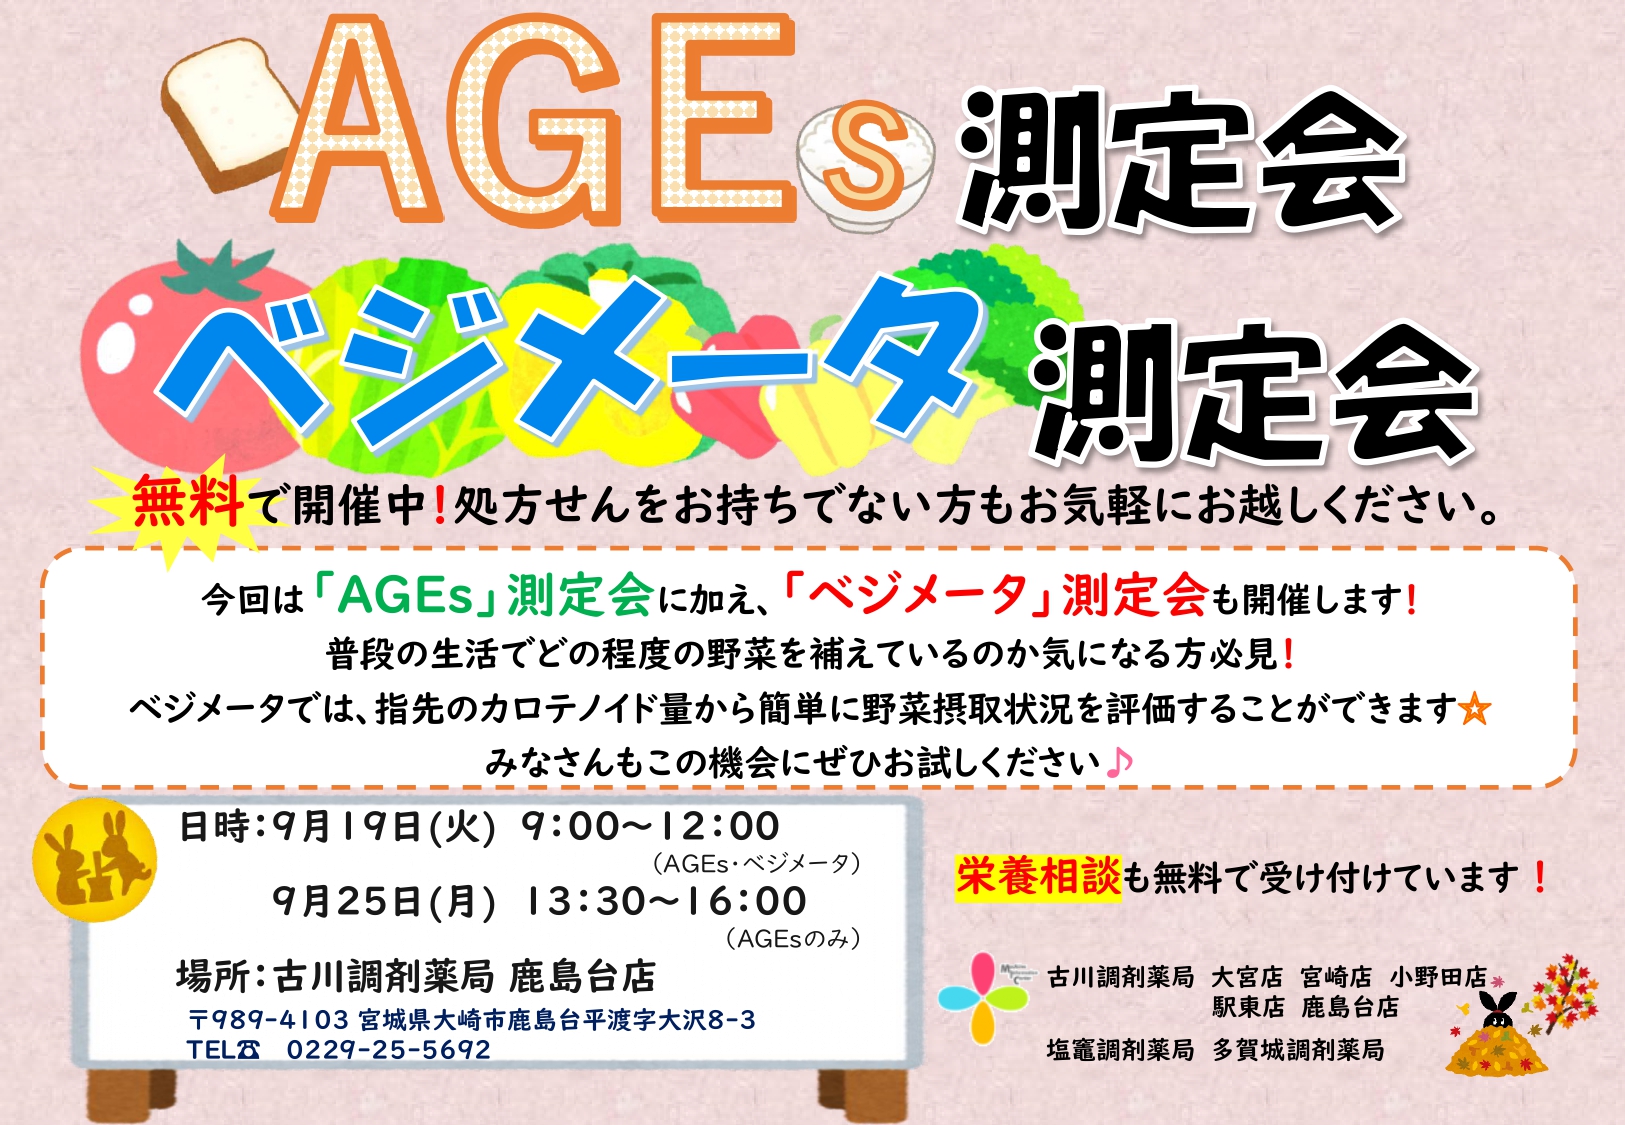 AGEs測定会＆べジメータ測定会　告知用紙(2023.9月 鹿島台店)_page-0001